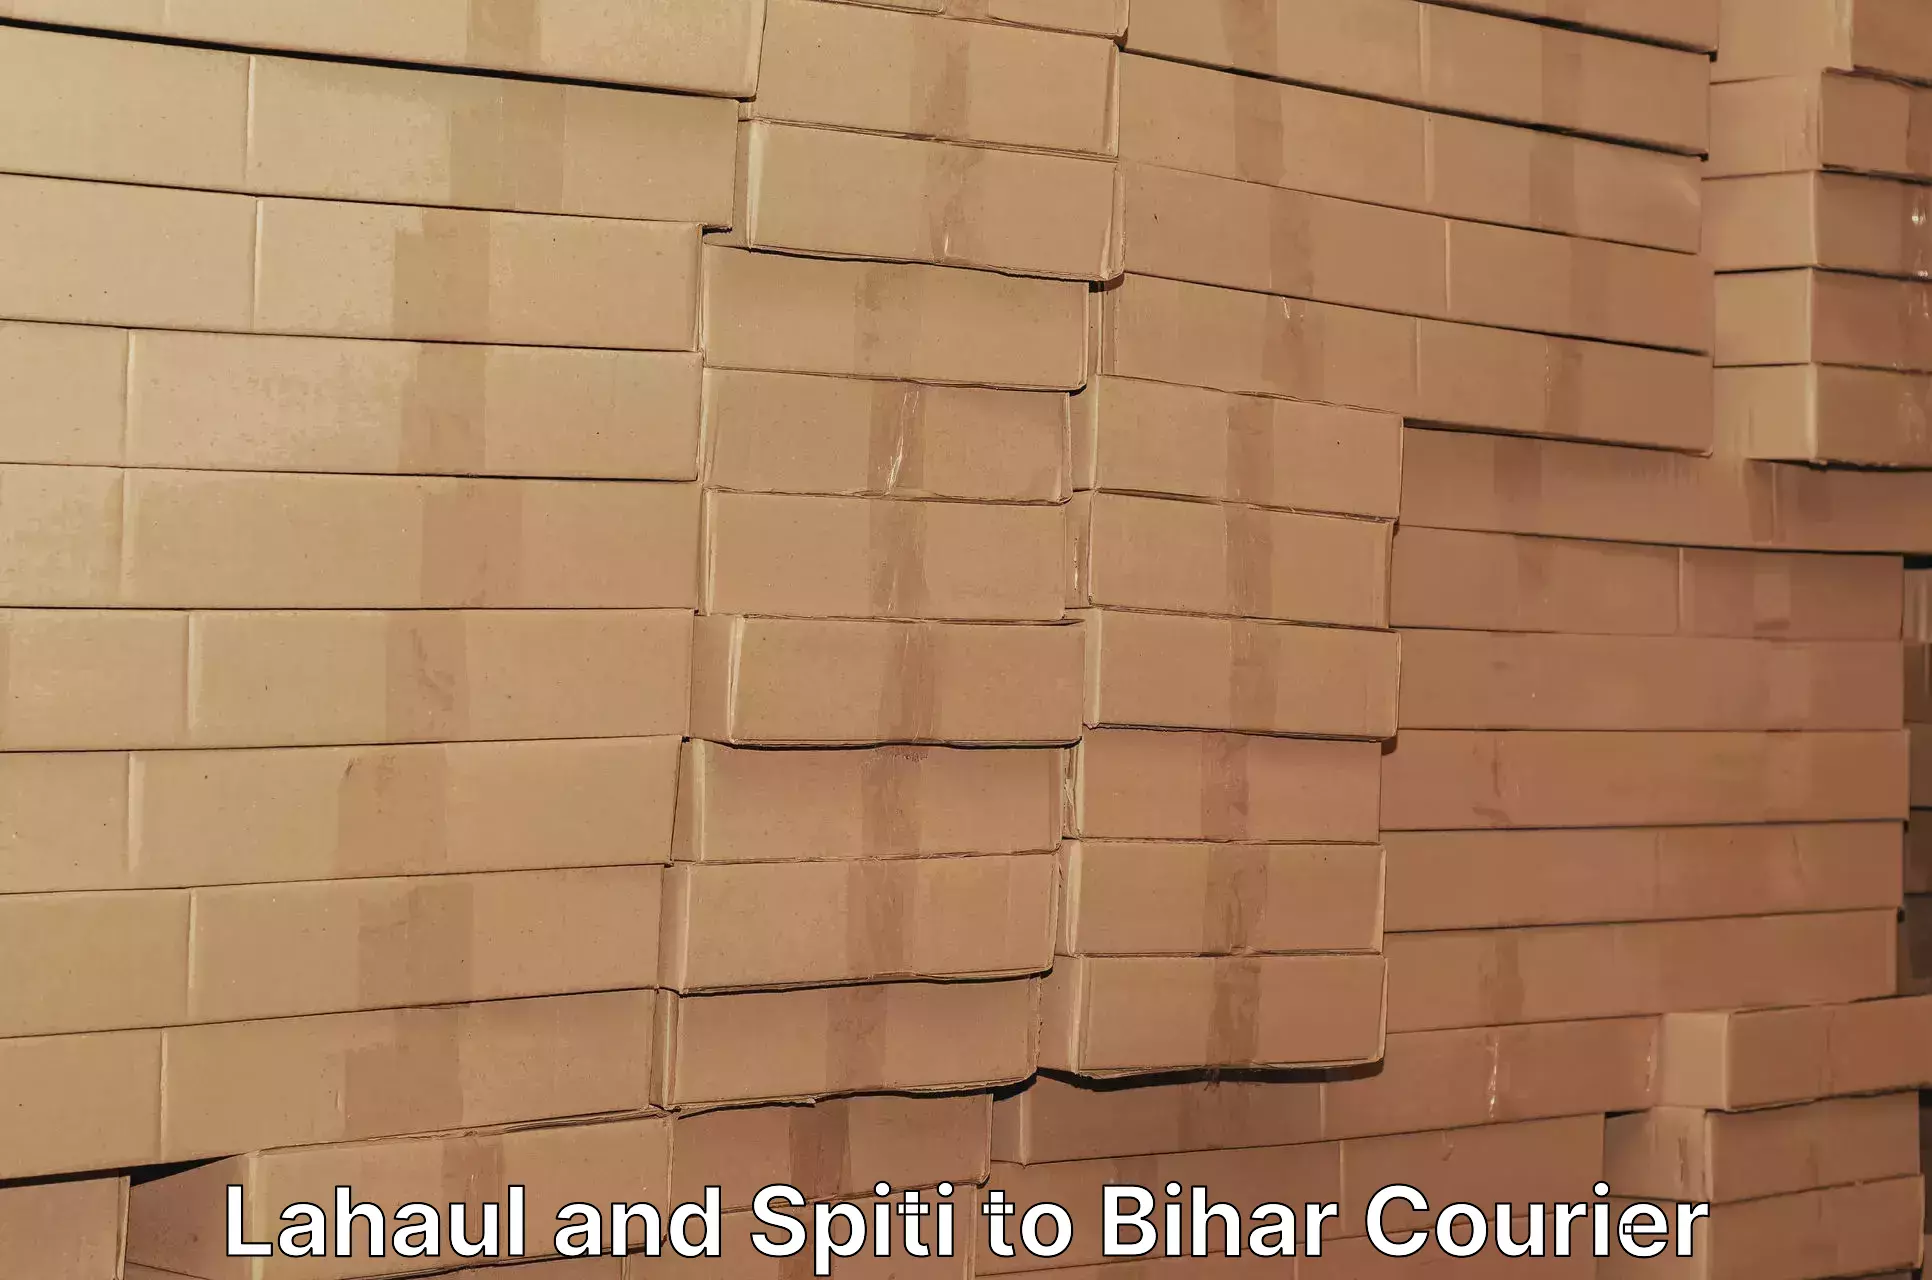 Courier service innovation Lahaul and Spiti to Bihar